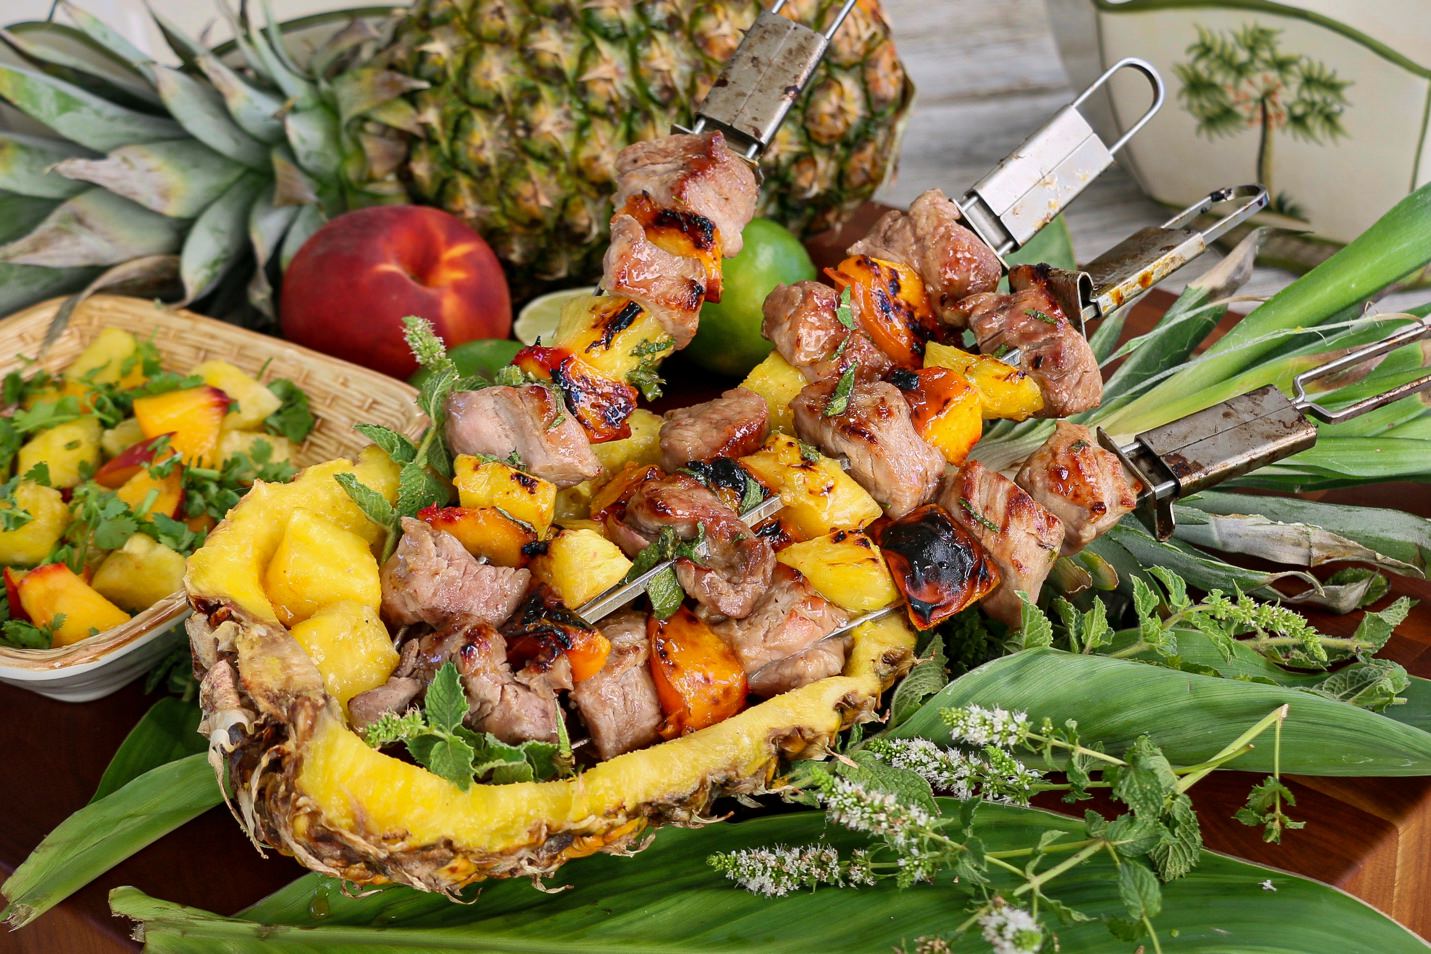 Pork, Peach, and Pineapple Kebabs with Zesty Mint Agave from the Beefer